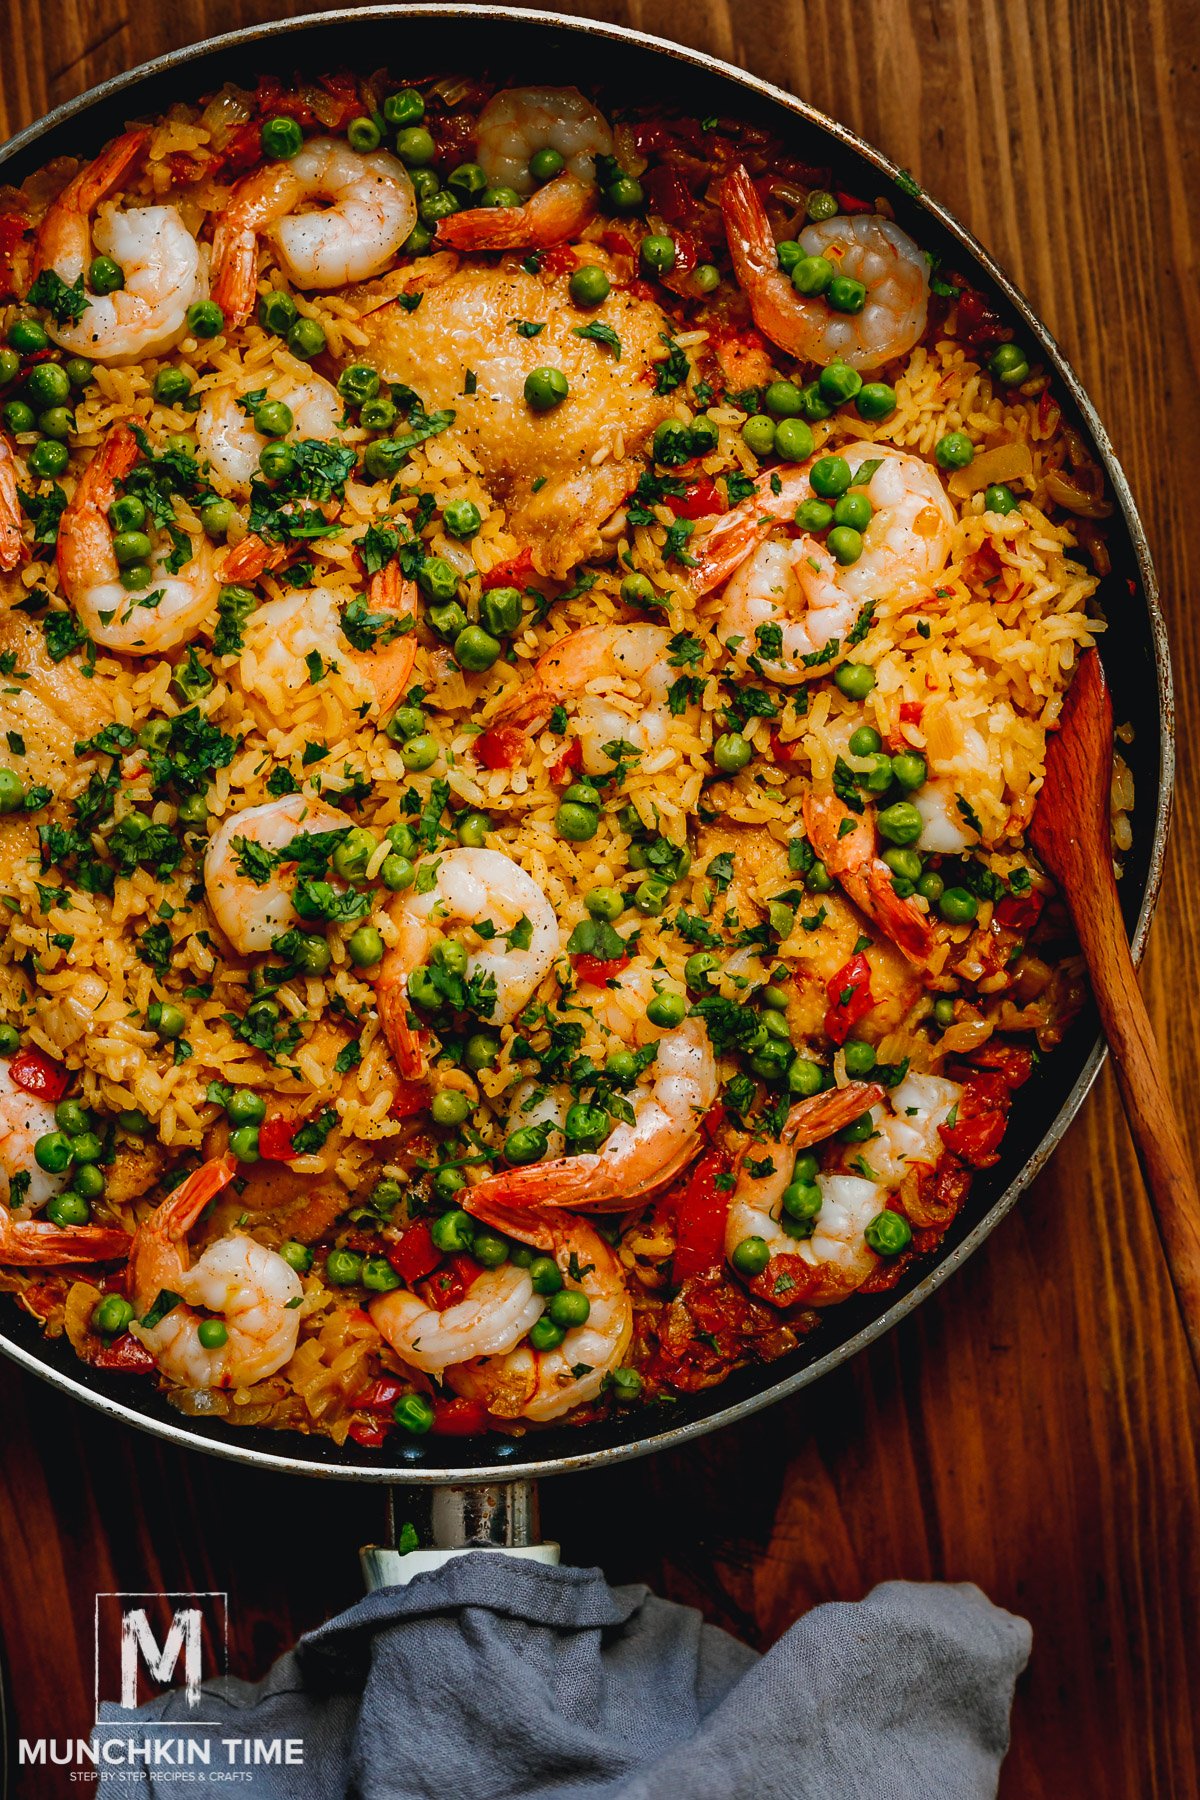 Chicken Thighs and Shrimp Paella inside the skillet, ready to be eaten.